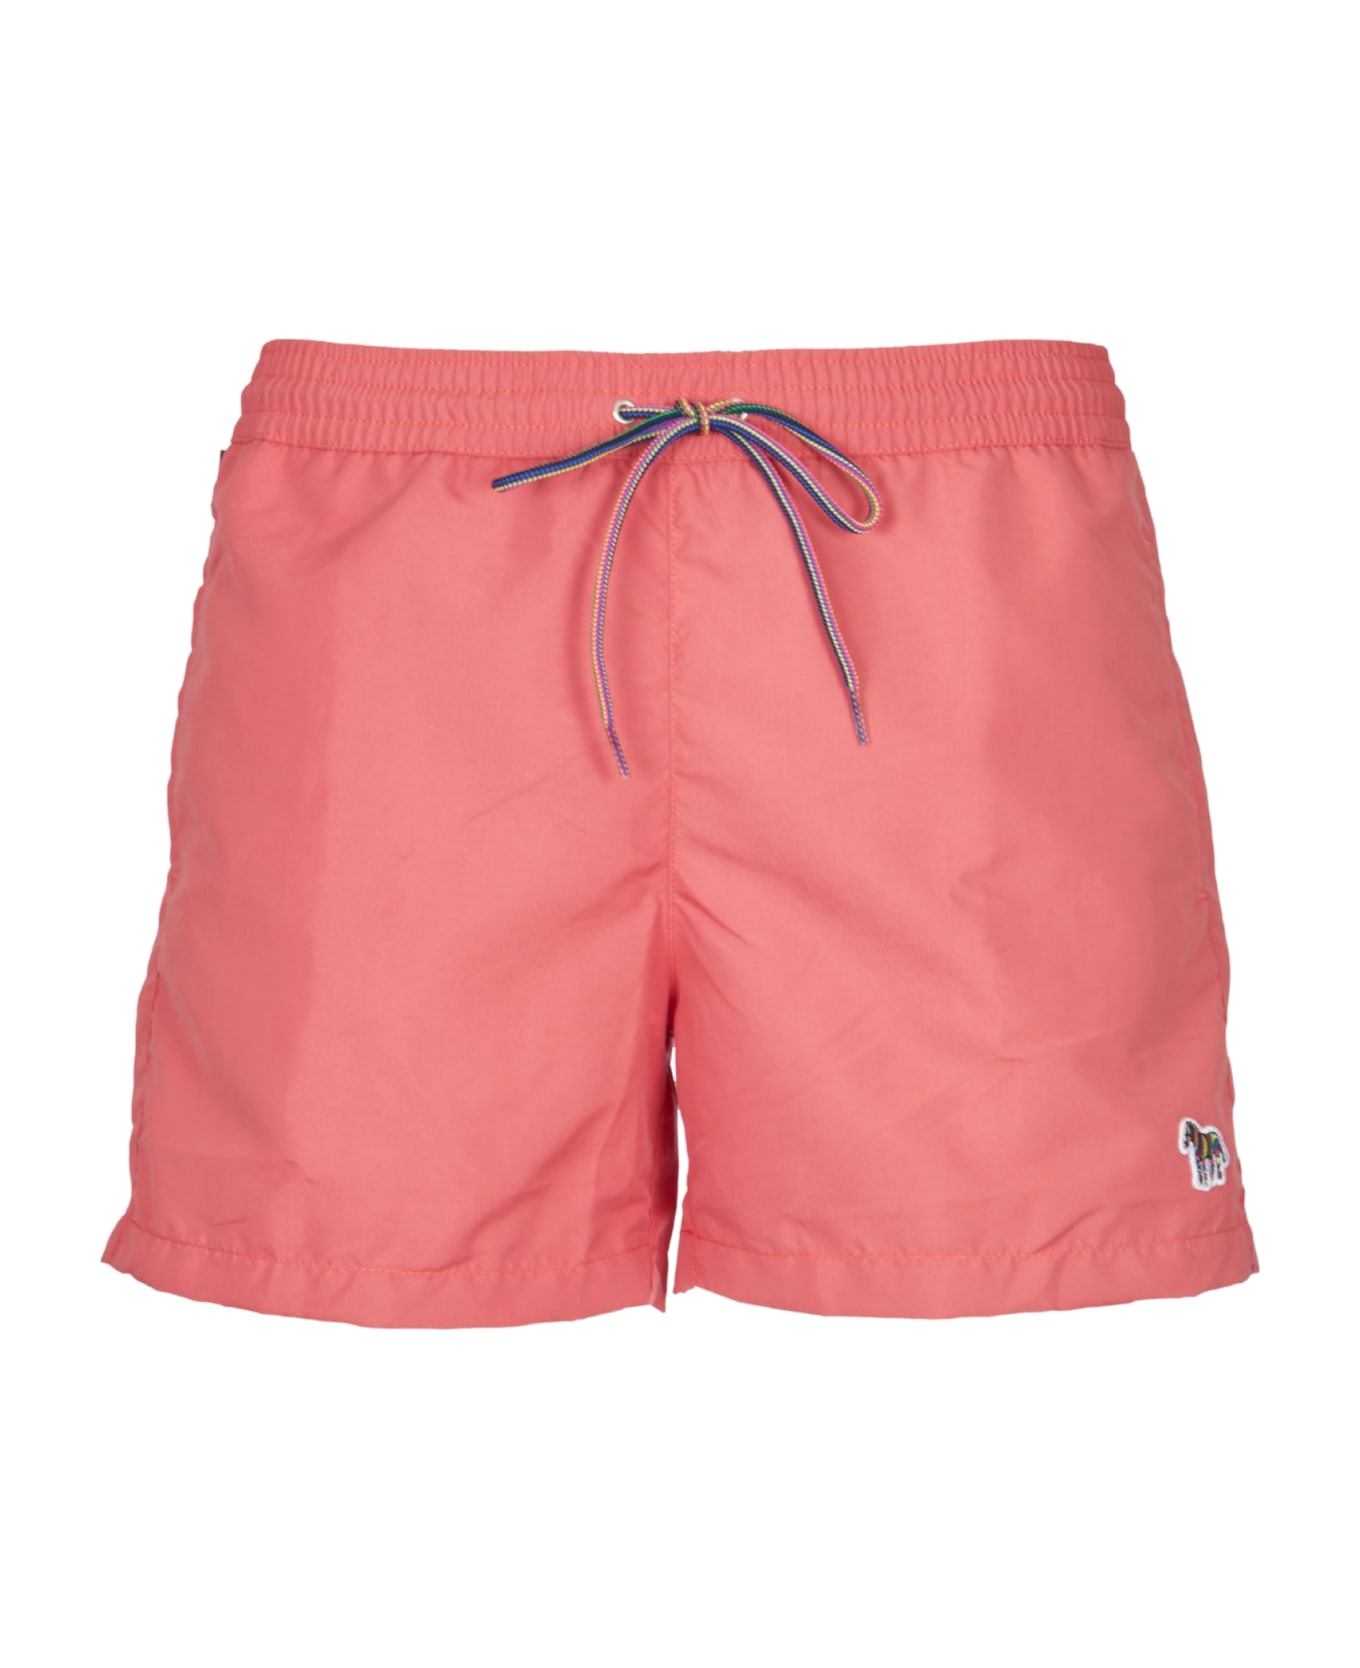 Paul Smith Swimsuit - Pink